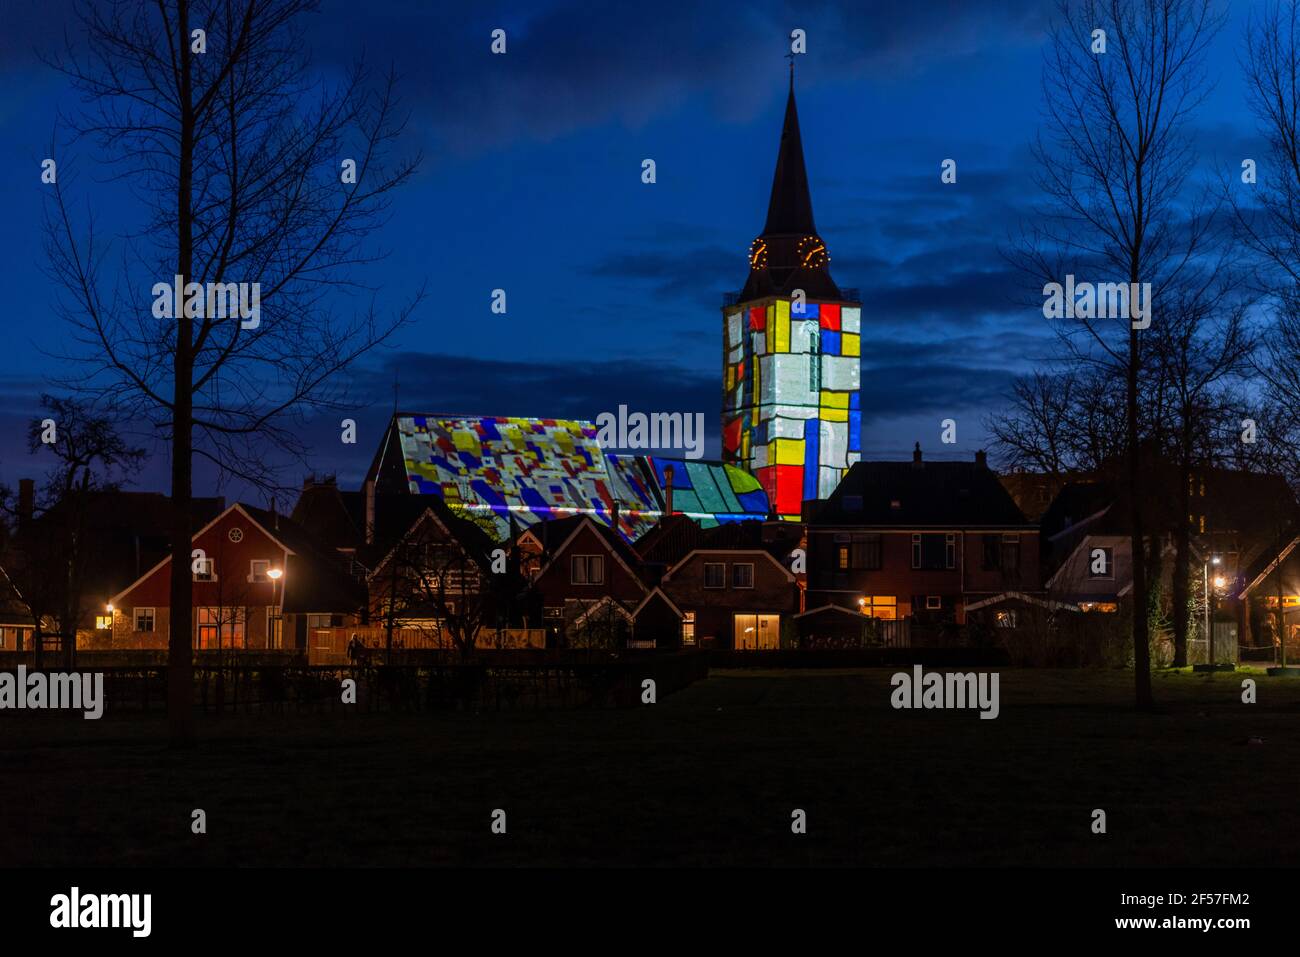 Winterswijk, March 5, 2016. In honor of the 144th birthday of Piet Mondrian, the famous painter, the monumental Jacob's Church in Winterswijk was illu Stock Photo